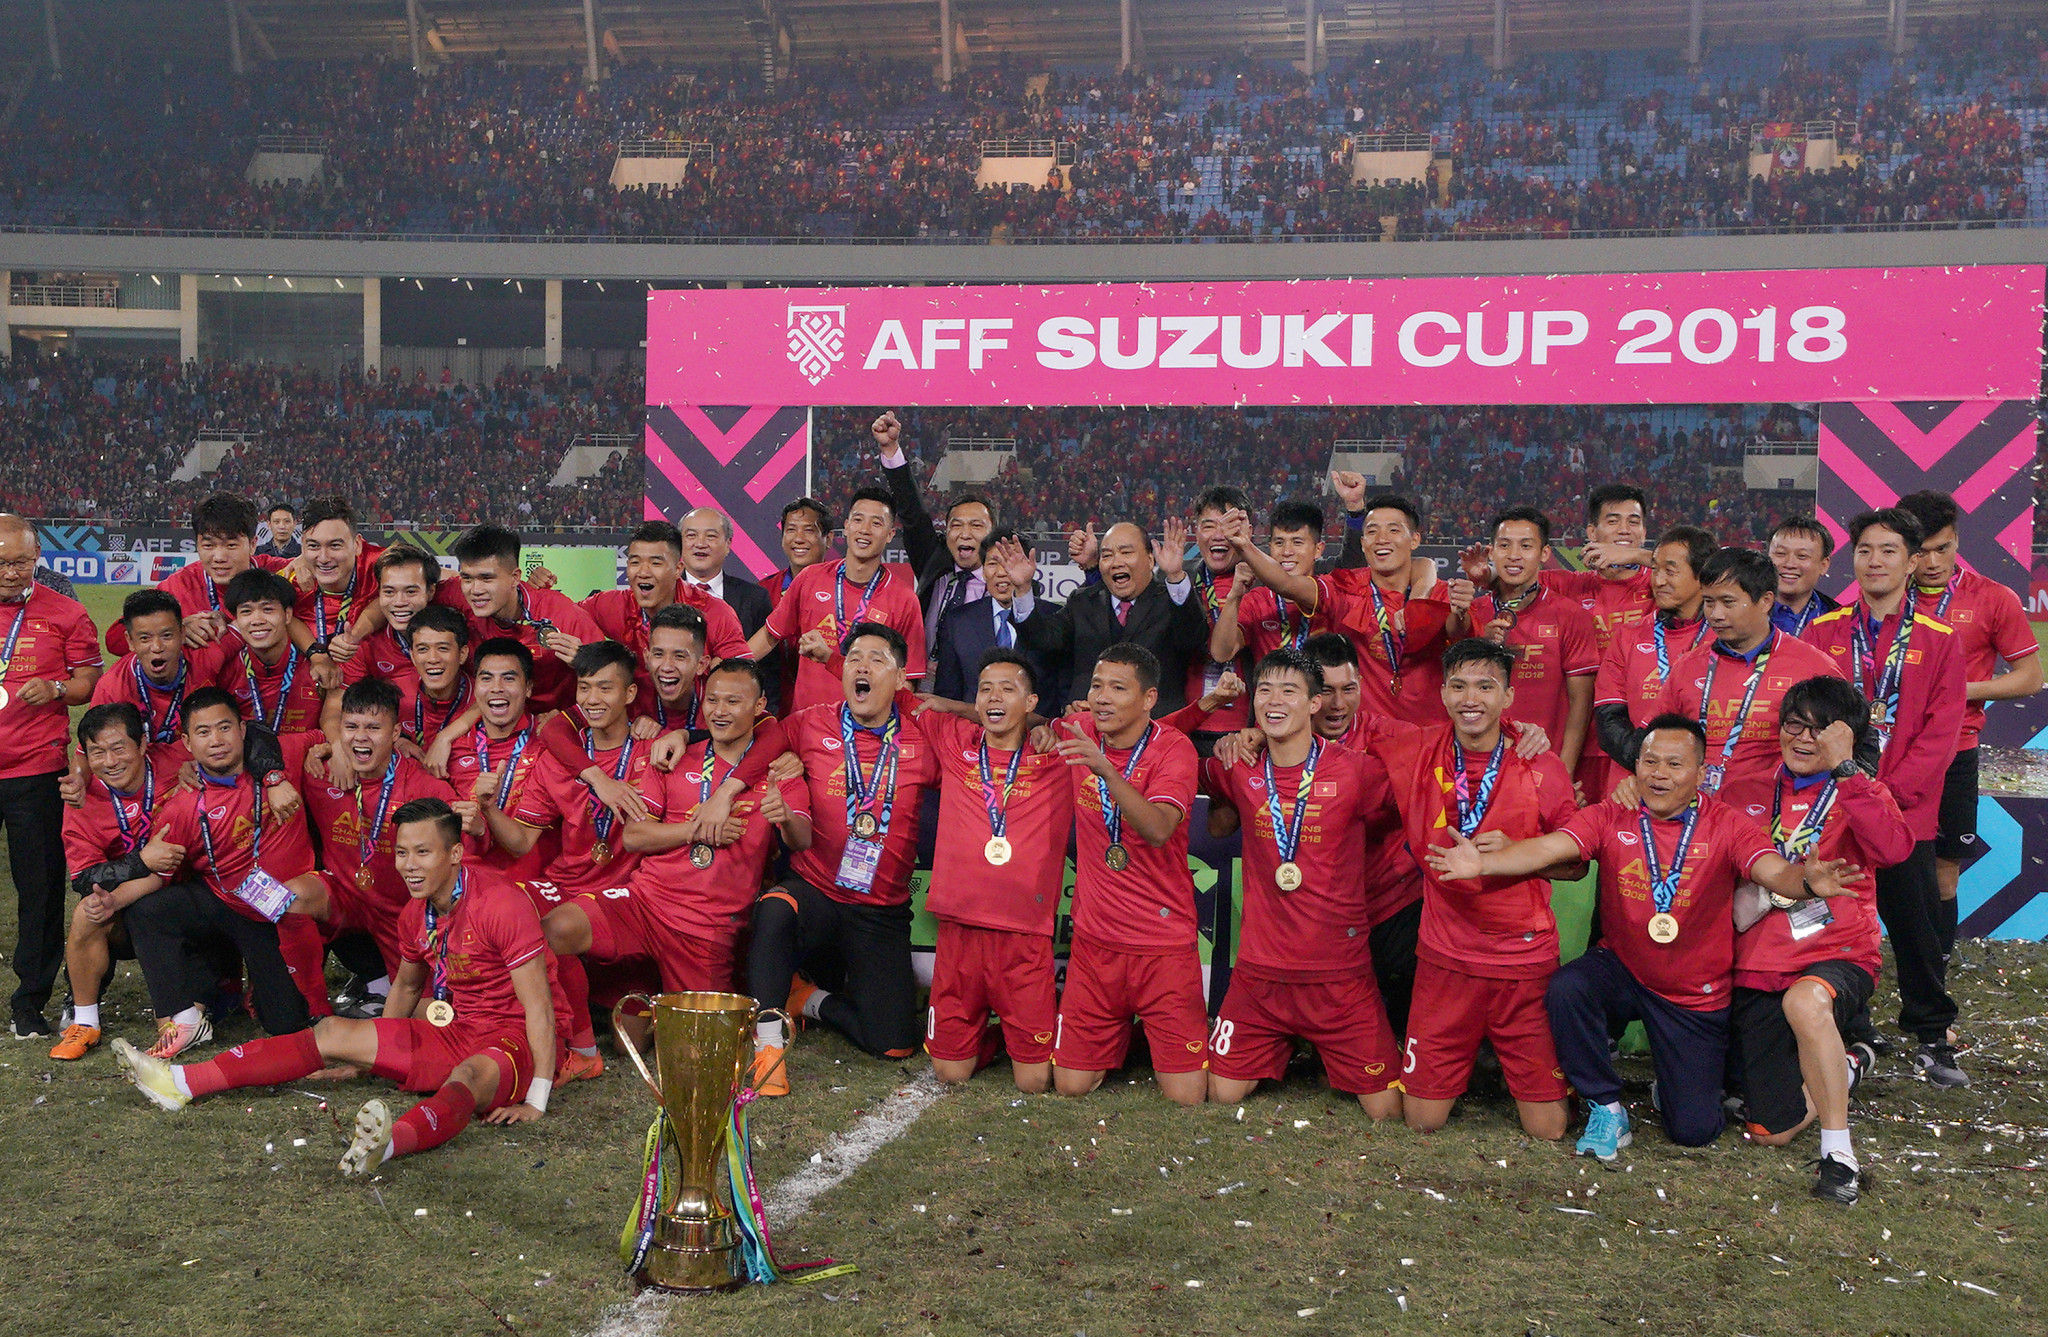 Vietnam beat Malaysia to win the last edition of the Suzuki Cup in 2018 ©Getty Images